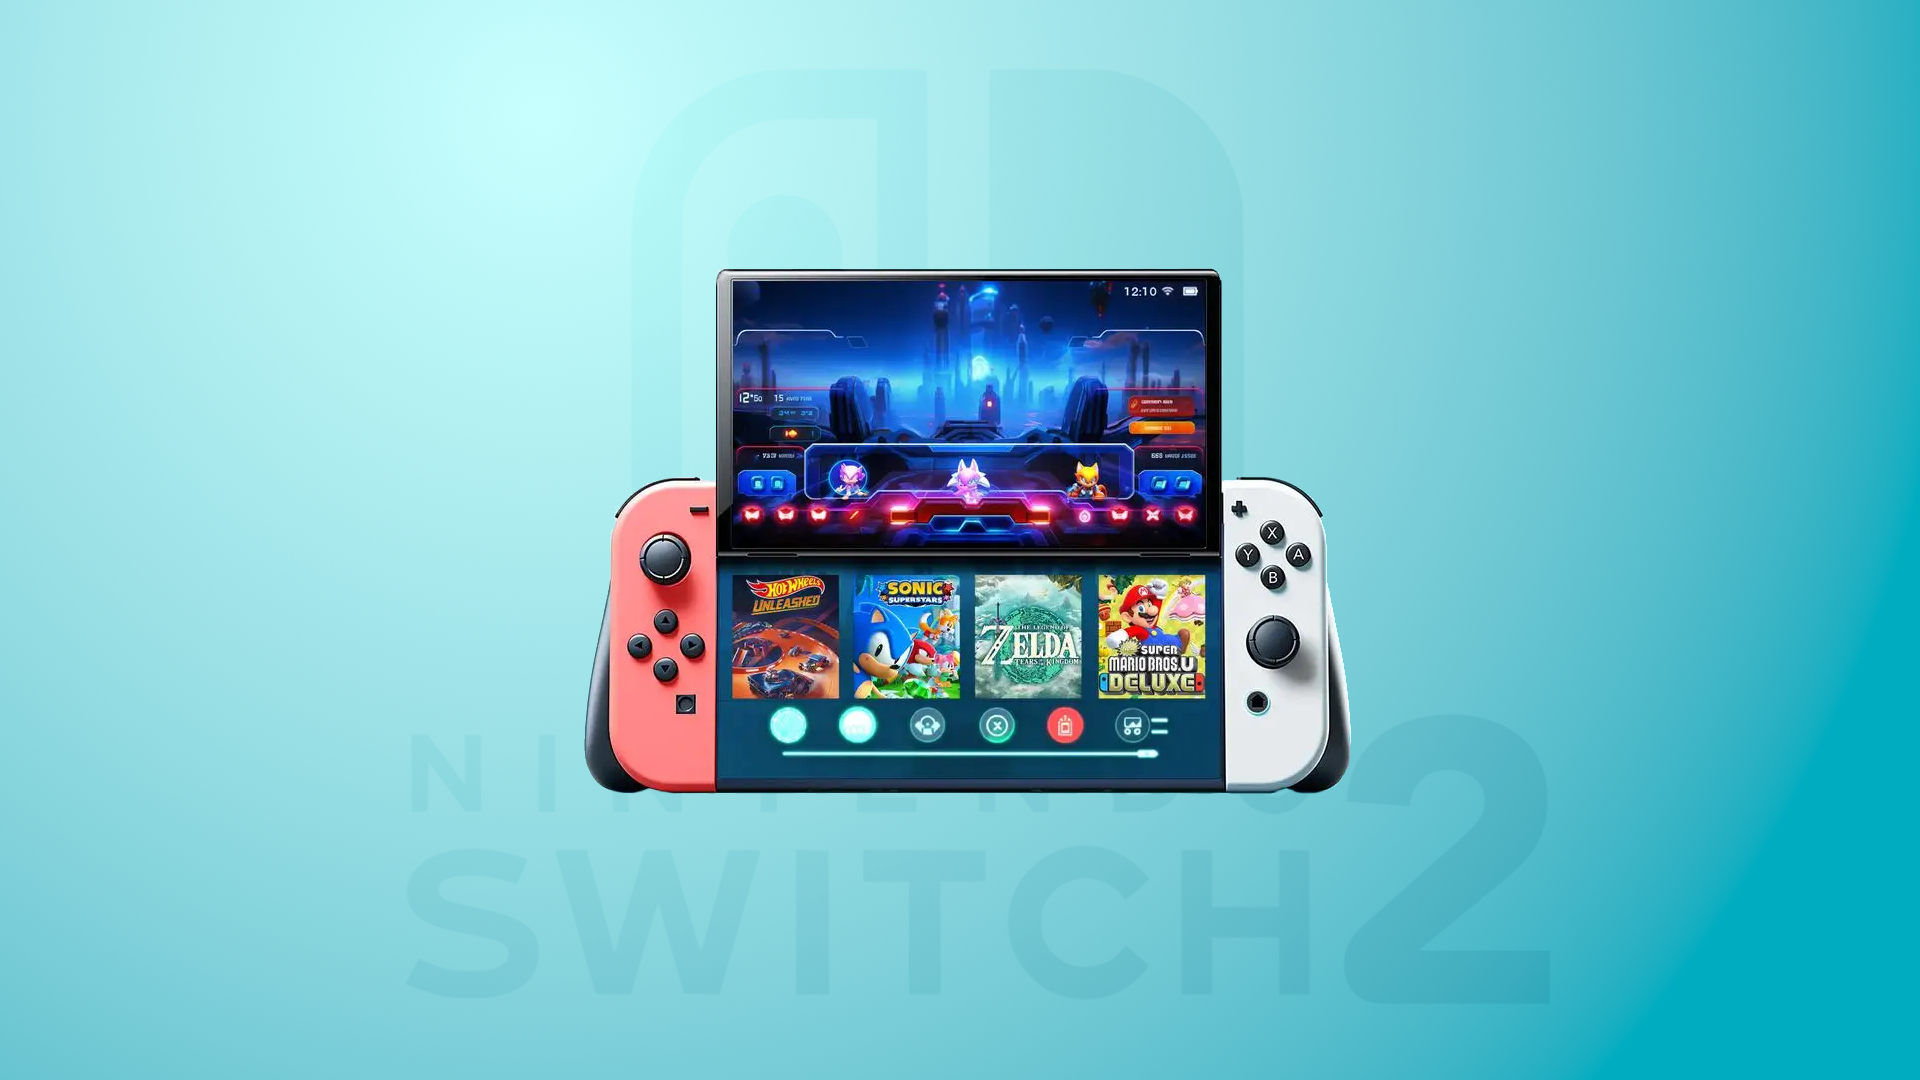 Nintendo Switch 2: Price rumors, release date speculation